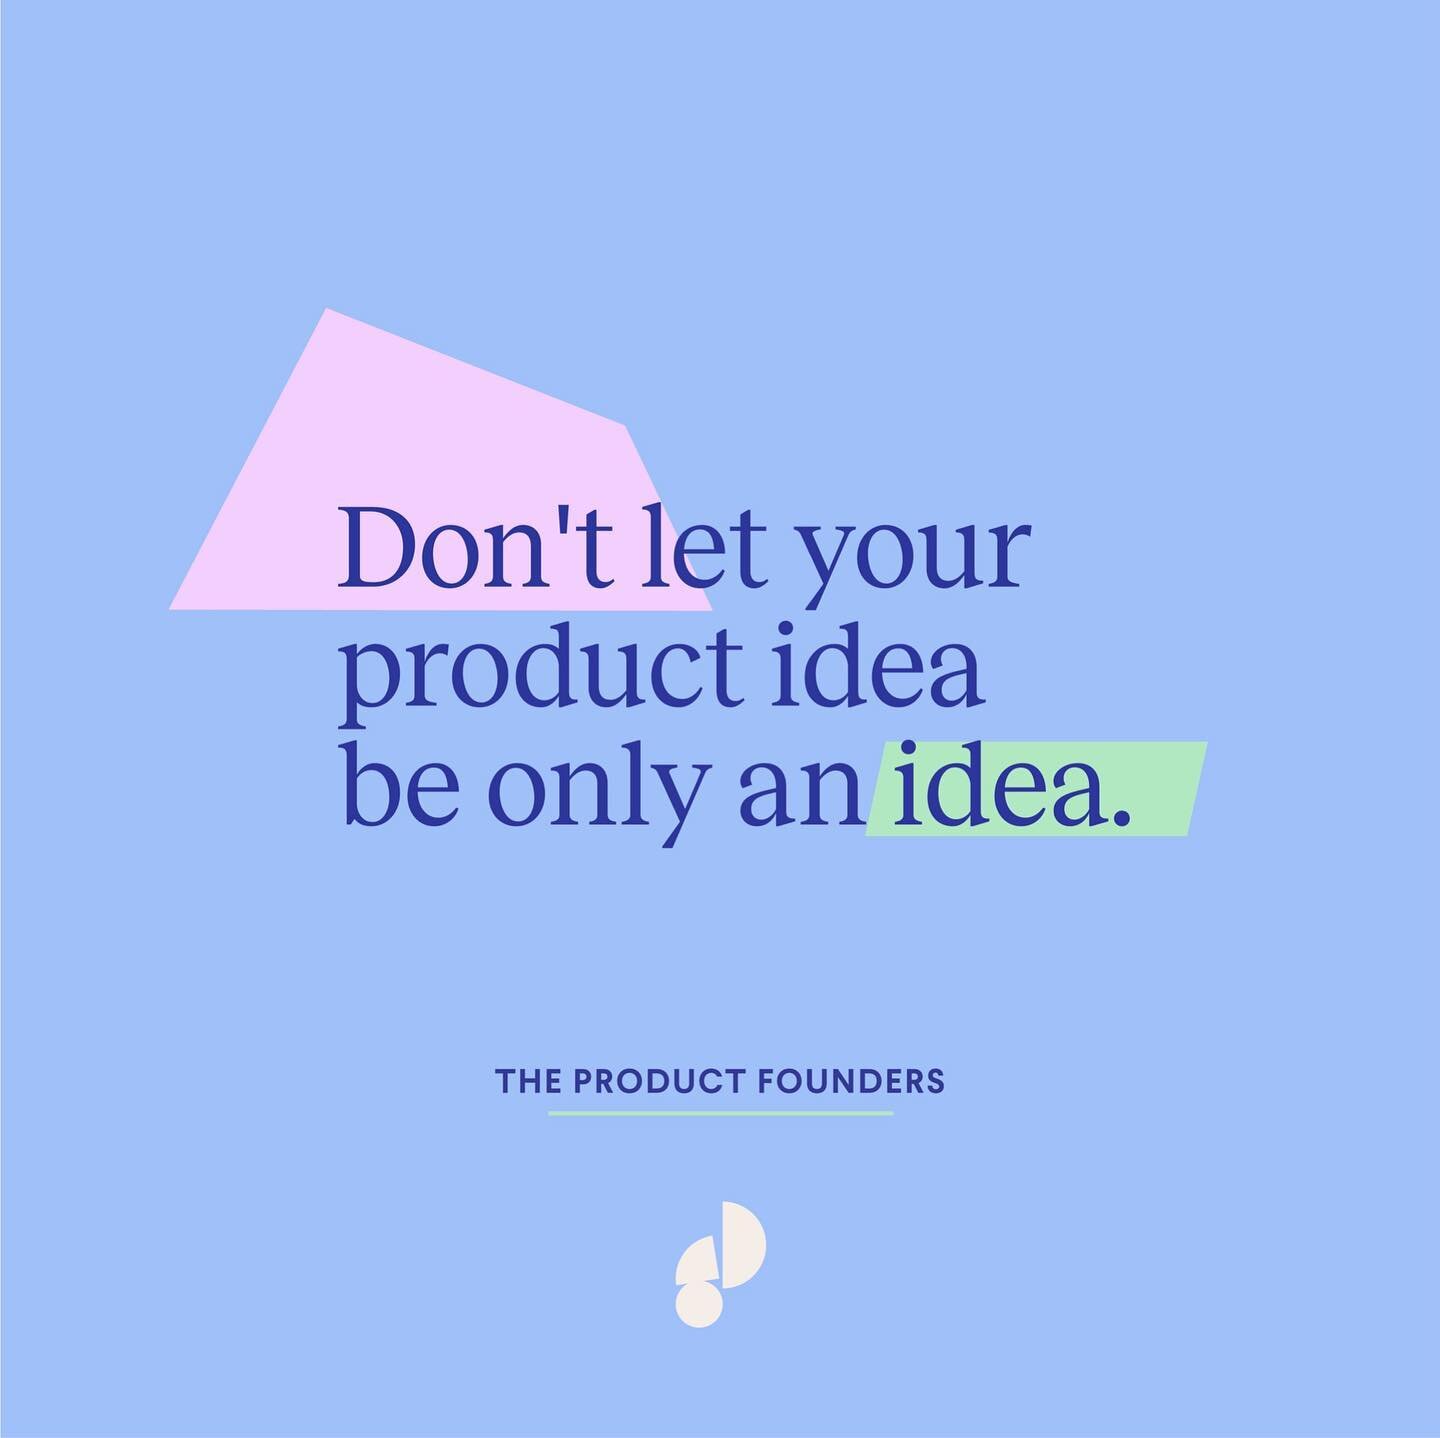 Good Morning! Here&rsquo;s your motivation to get STARTED!
I hate &ldquo;What if&rdquo;&hellip; and what if you just let your brilliant product idea remain just an idea? Don&rsquo;t let your dreams and ideas be only What if&rsquo;s. Test them, trial 